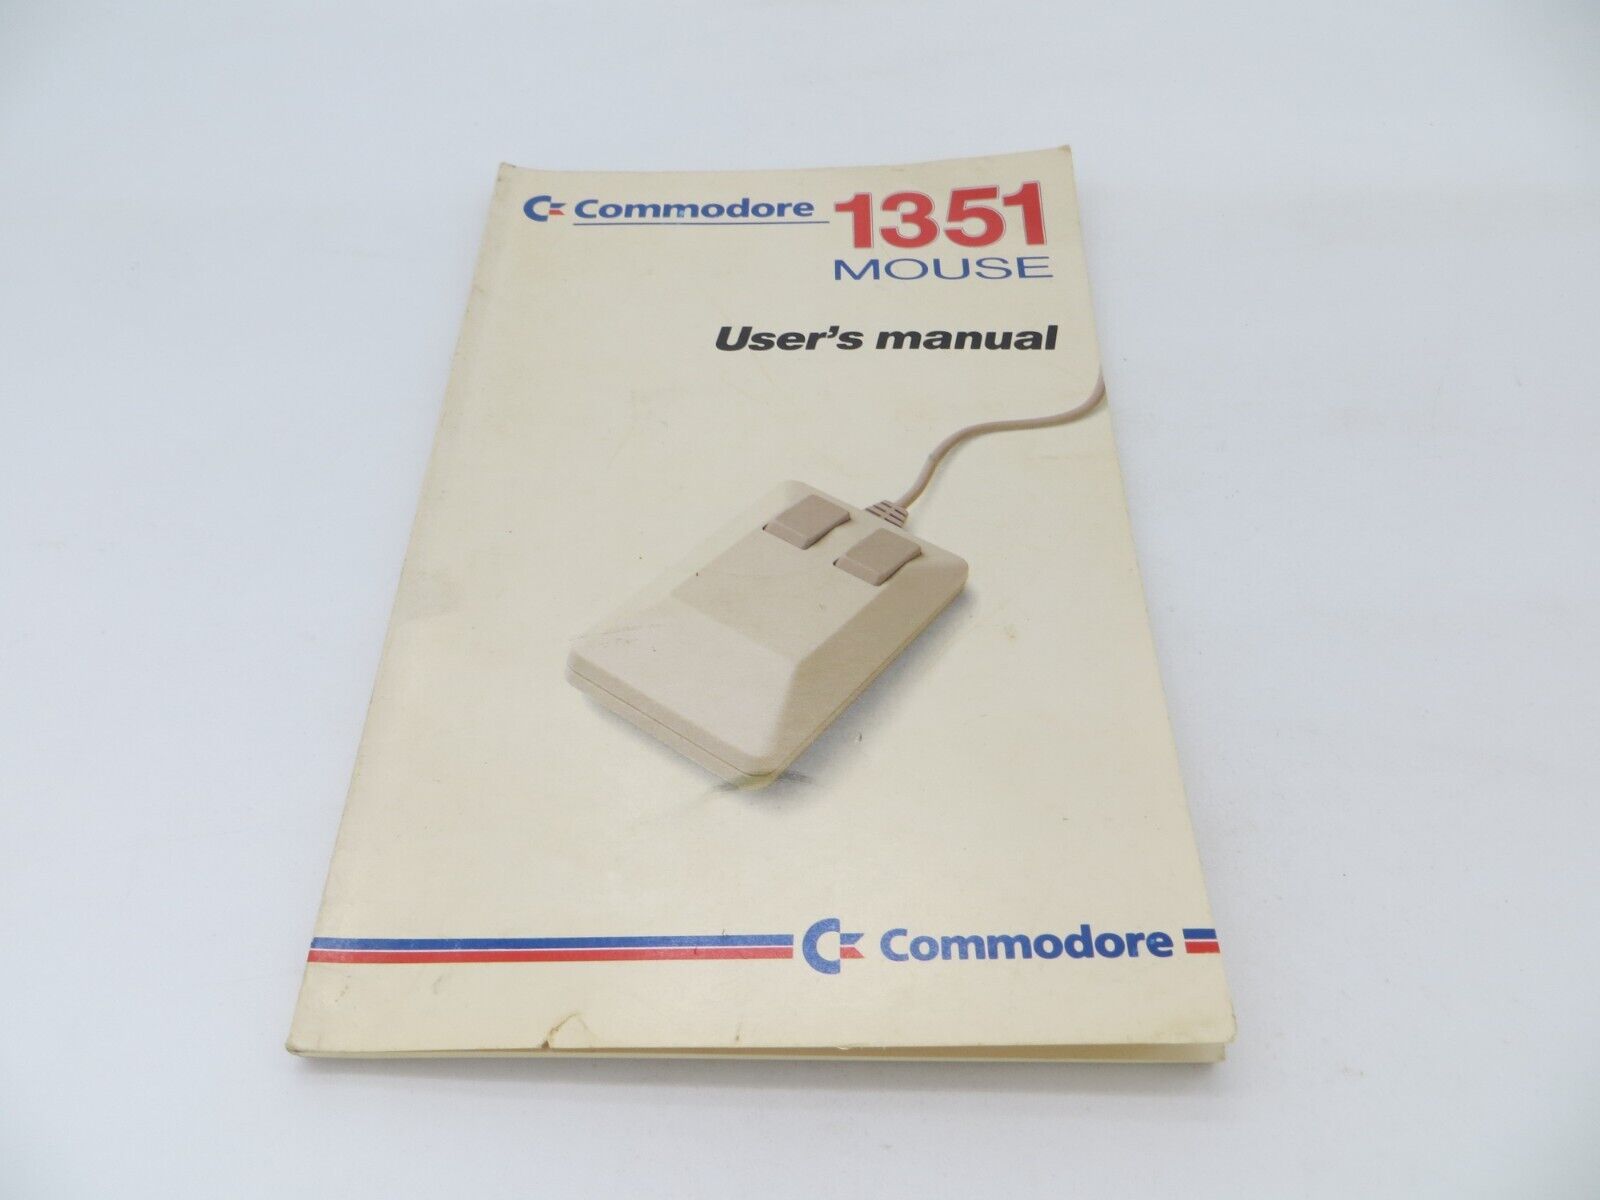 Commodore 1351 Mouse User's Manual - vintage computer book 1986